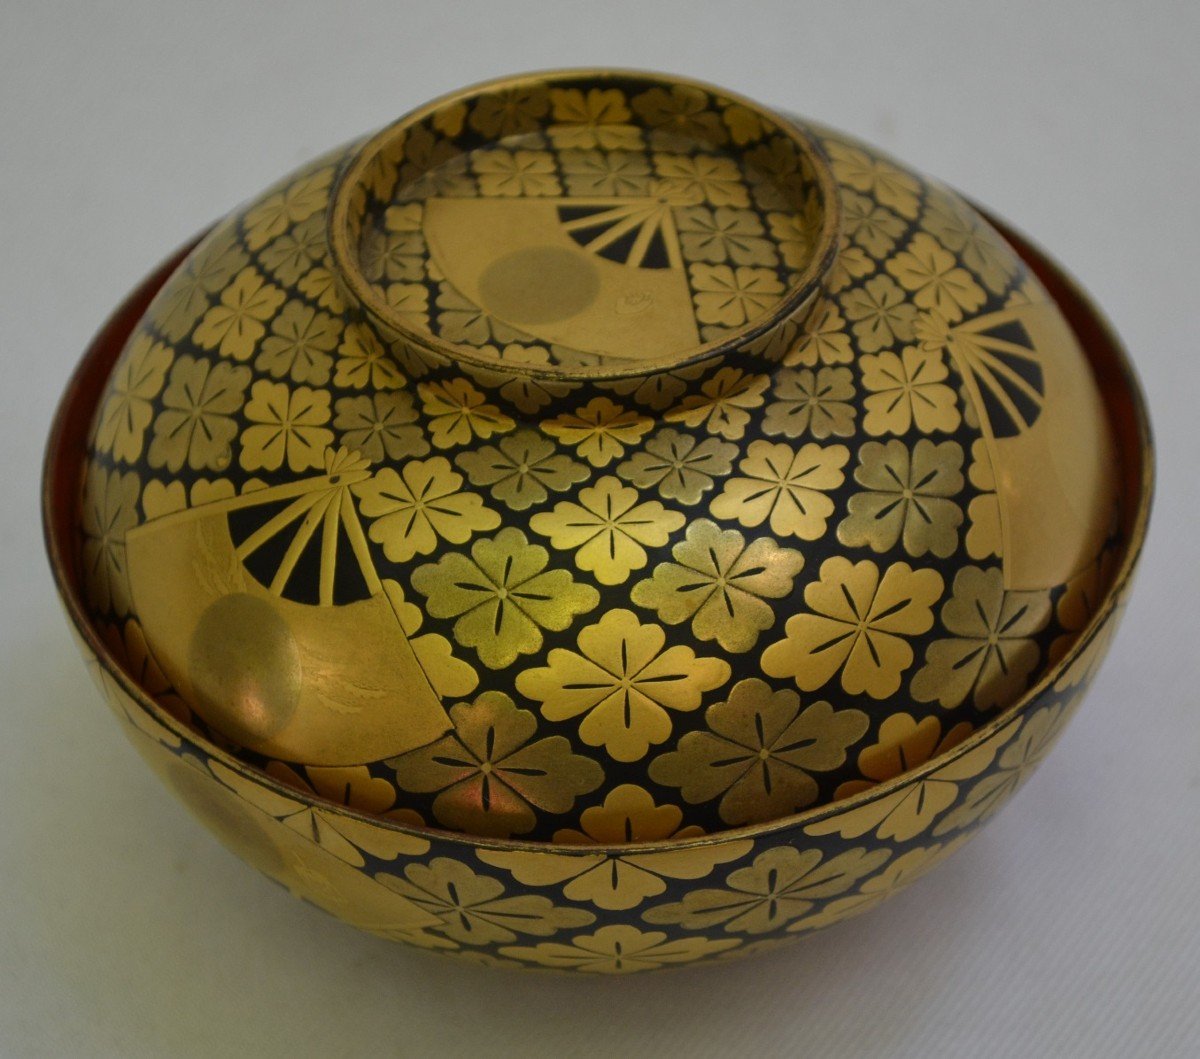 Covered Bowl In Gold Powdered Lacquer. Japan Edo Or Meiji Period, 19th Century.-photo-2